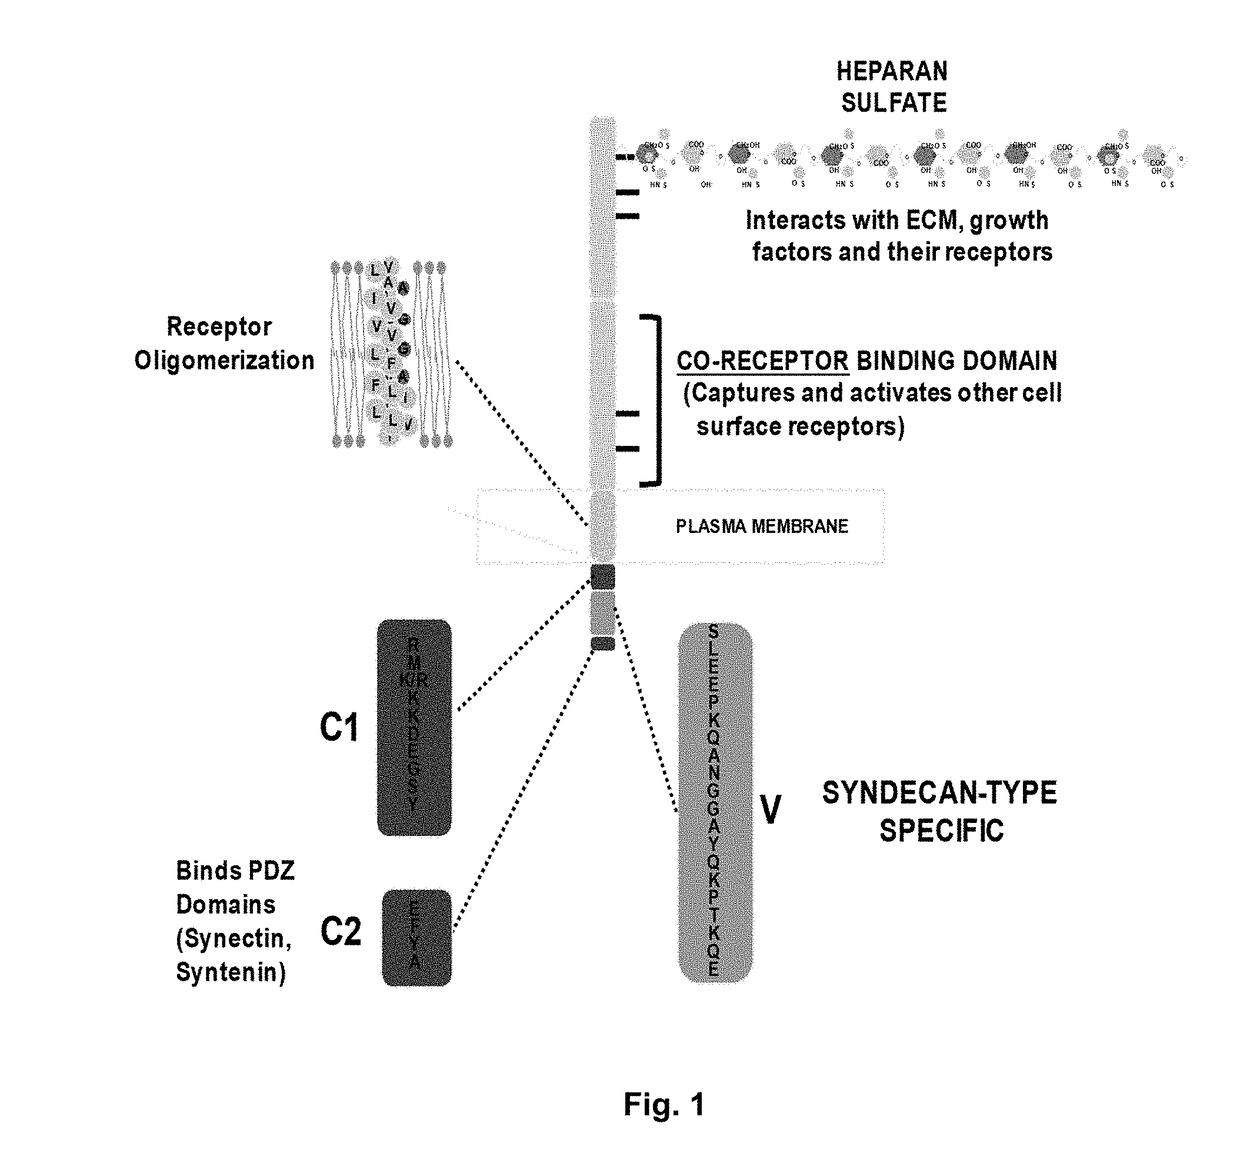 Peptides that Inhibit Syndecan-1 Activation of VLA-4 and IGF-1R